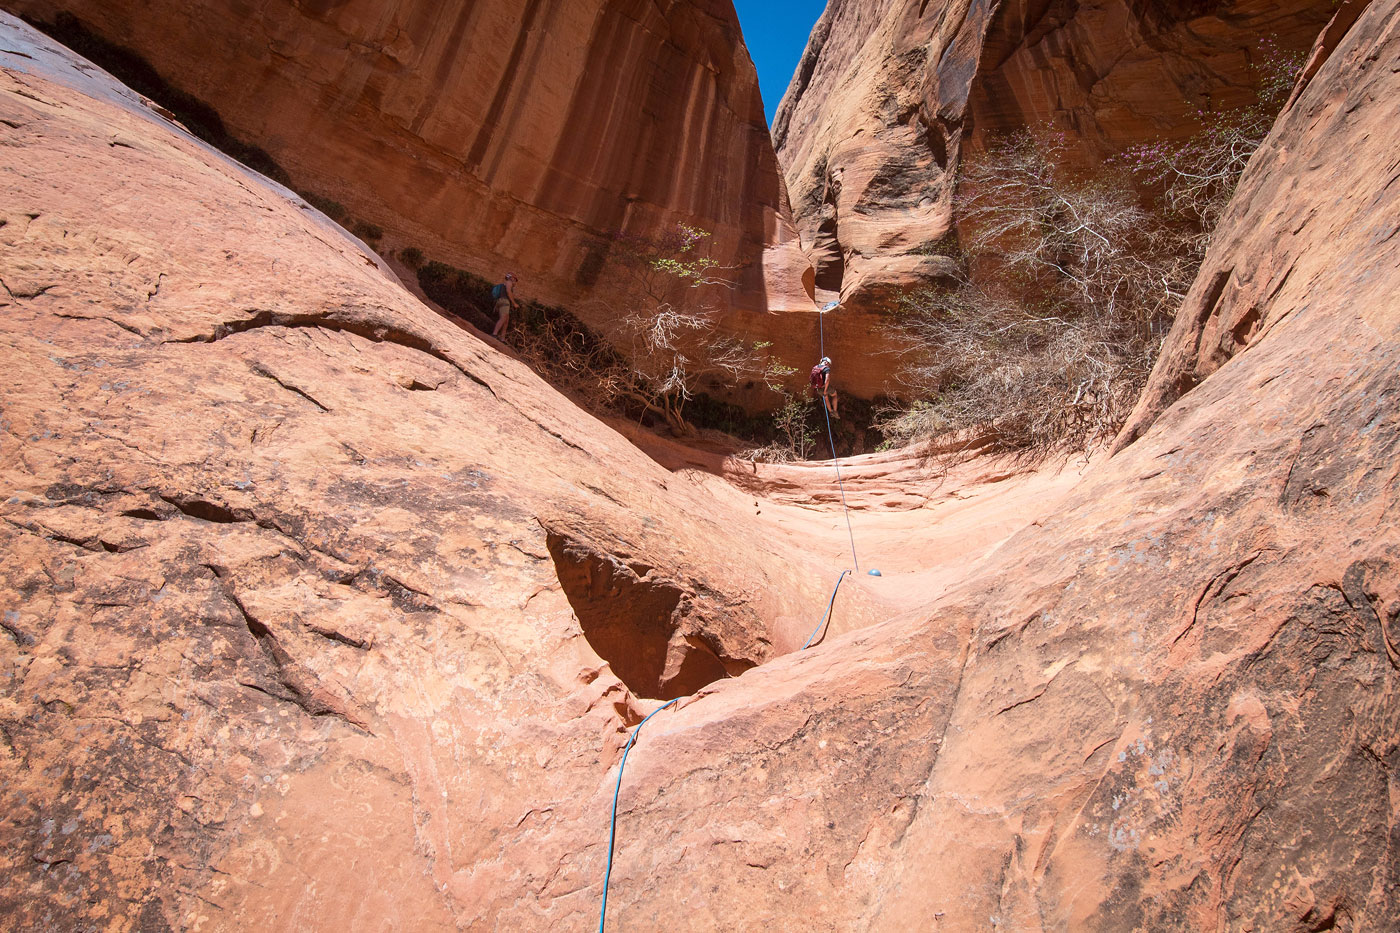 Canyoneer Purgatory Canyon (Dave's Not Dead) in Glen Canyon National Recreation Area, Utah - Stav is Lost